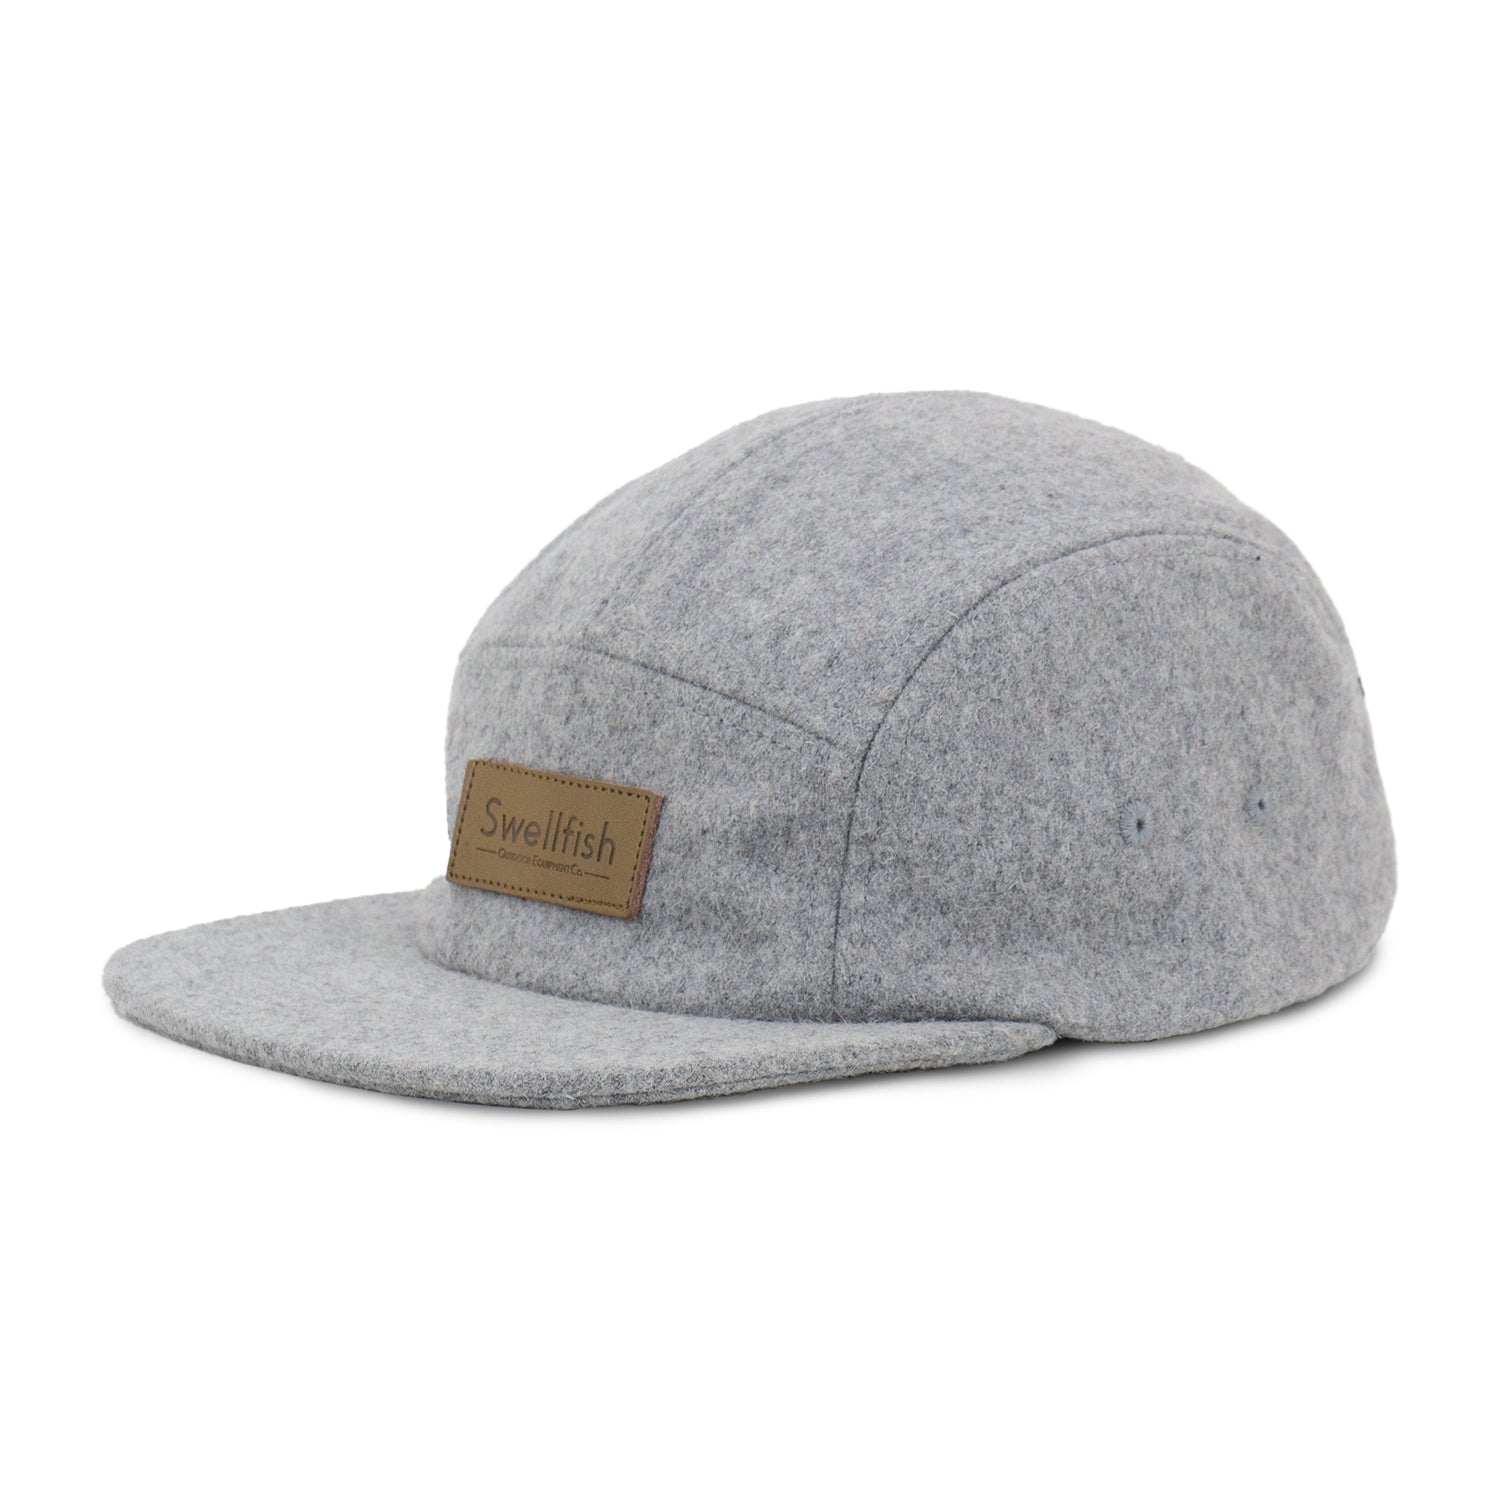 Felted Wool 5 Panel Campers Hat - Swellfish Outdoor Equipment Co.